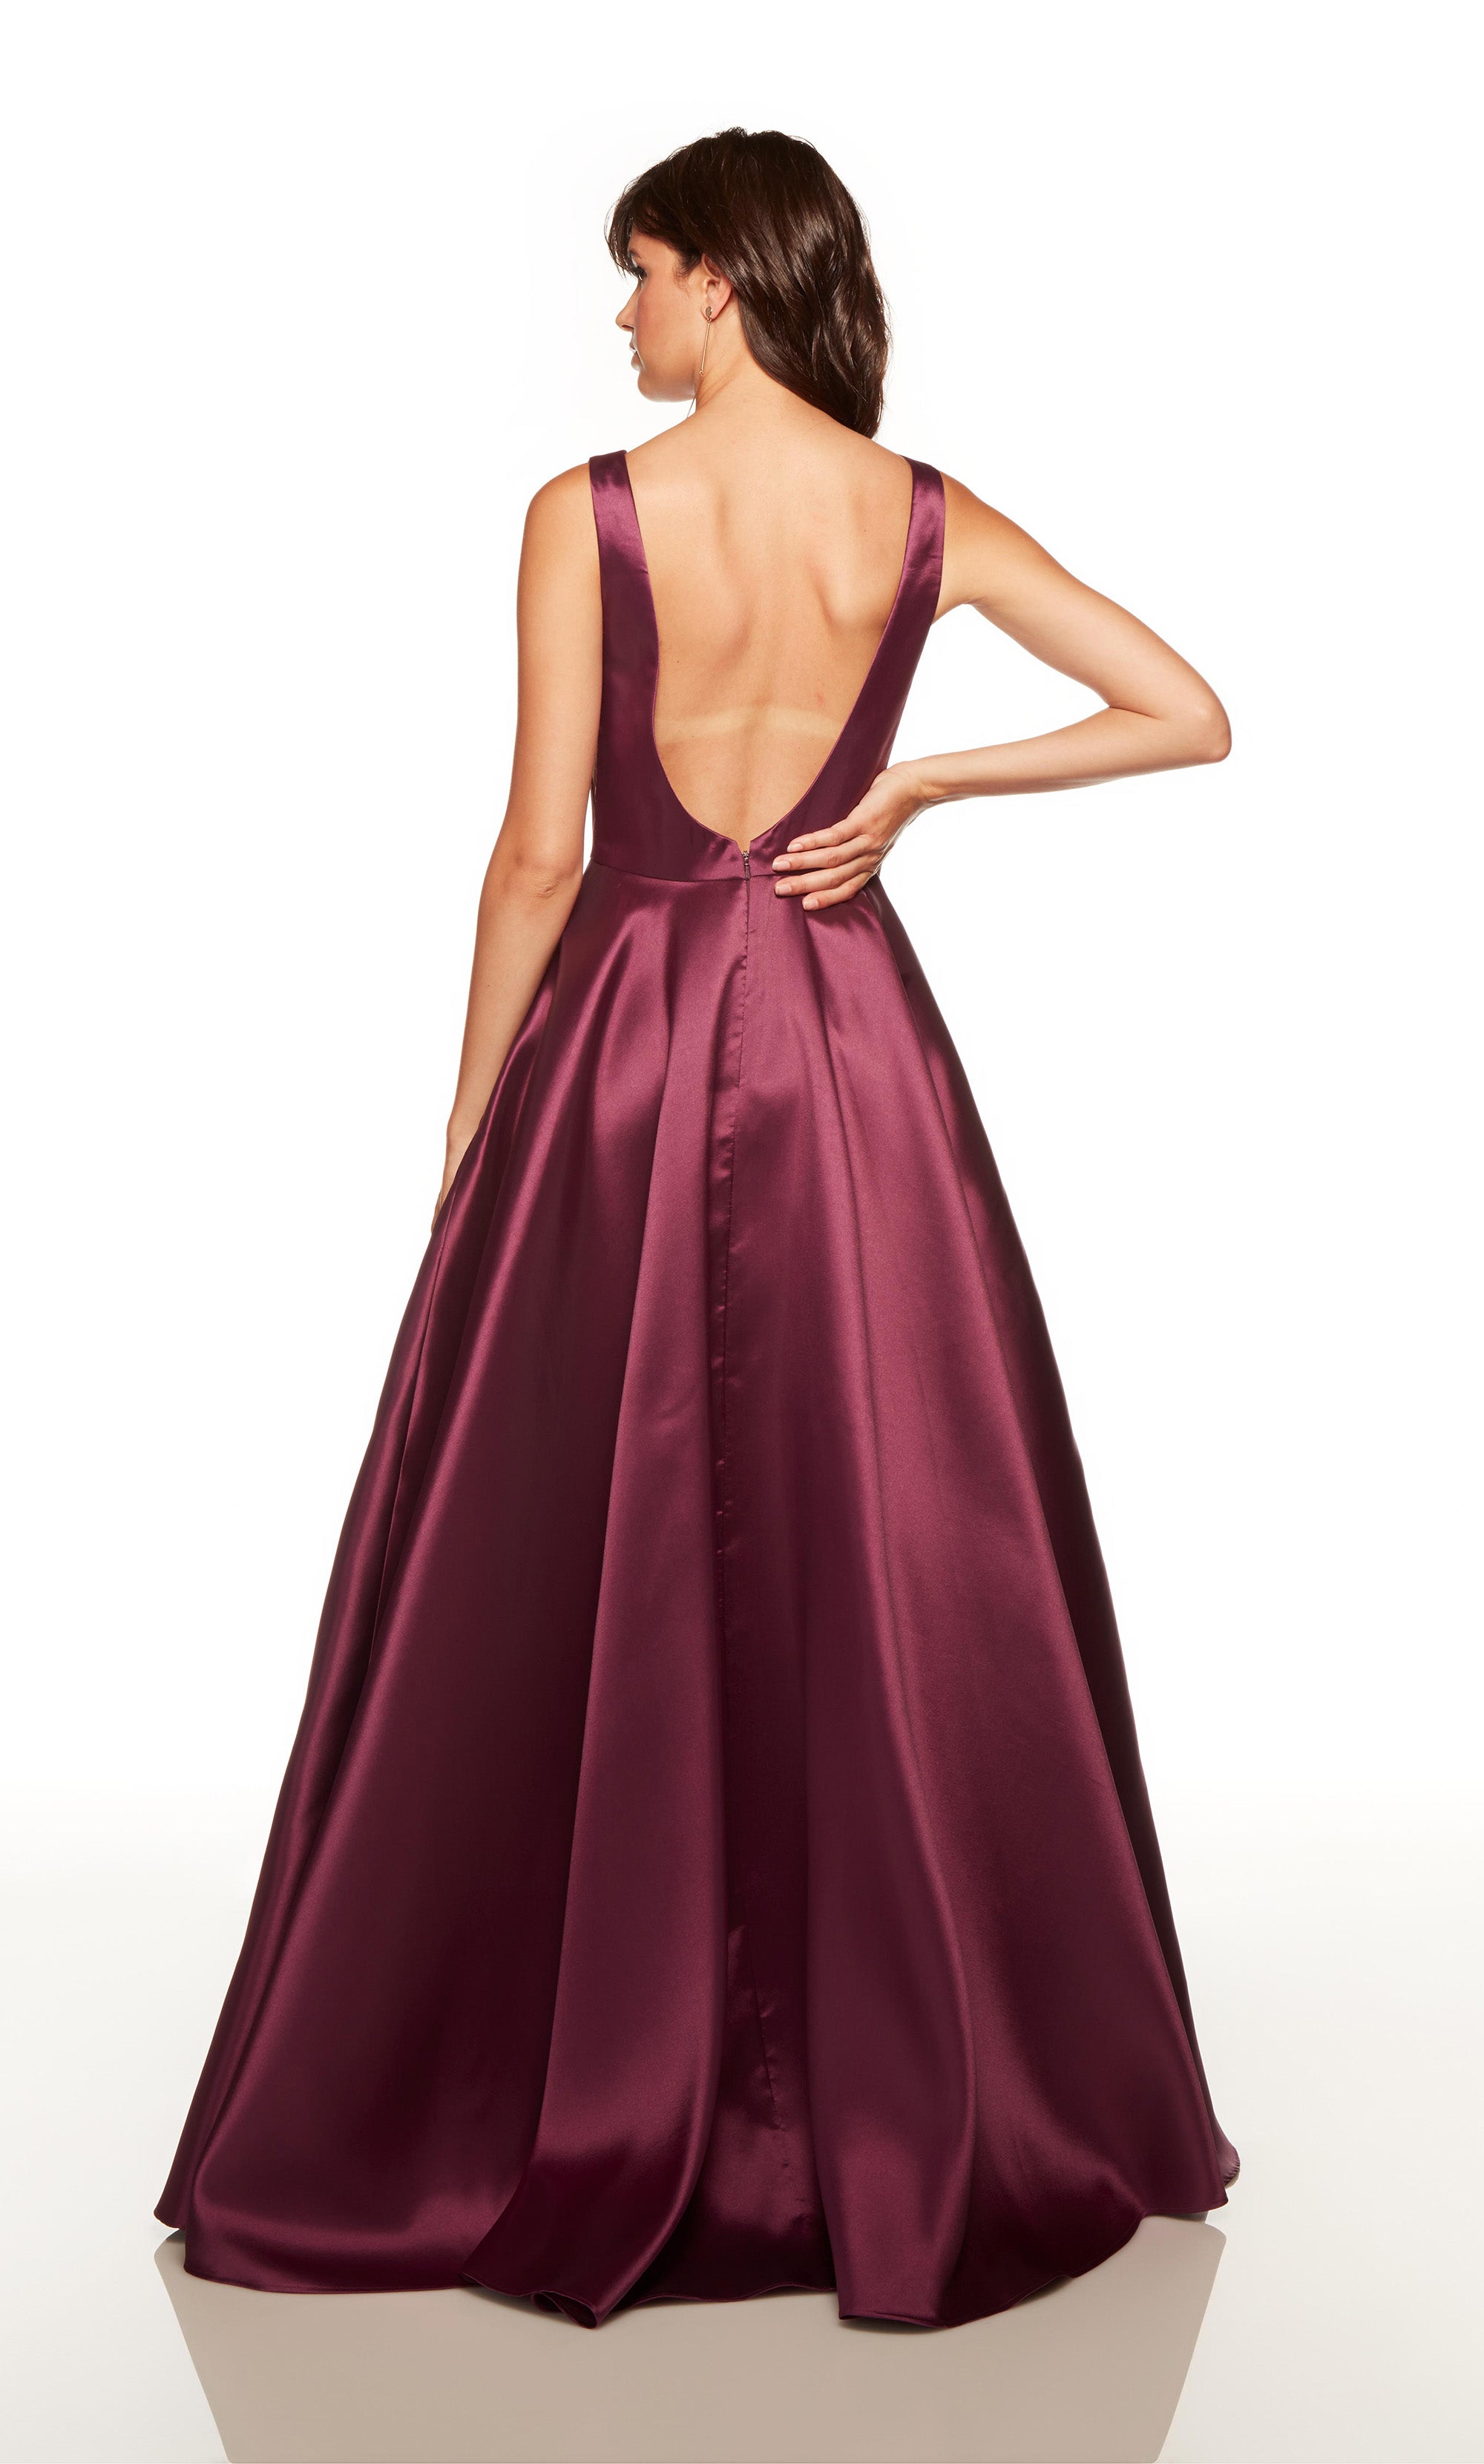 Long prom dress with a plunging neckline and side slit in black plum color. COLOR-SWATCH_1752__BLACK-PLUM